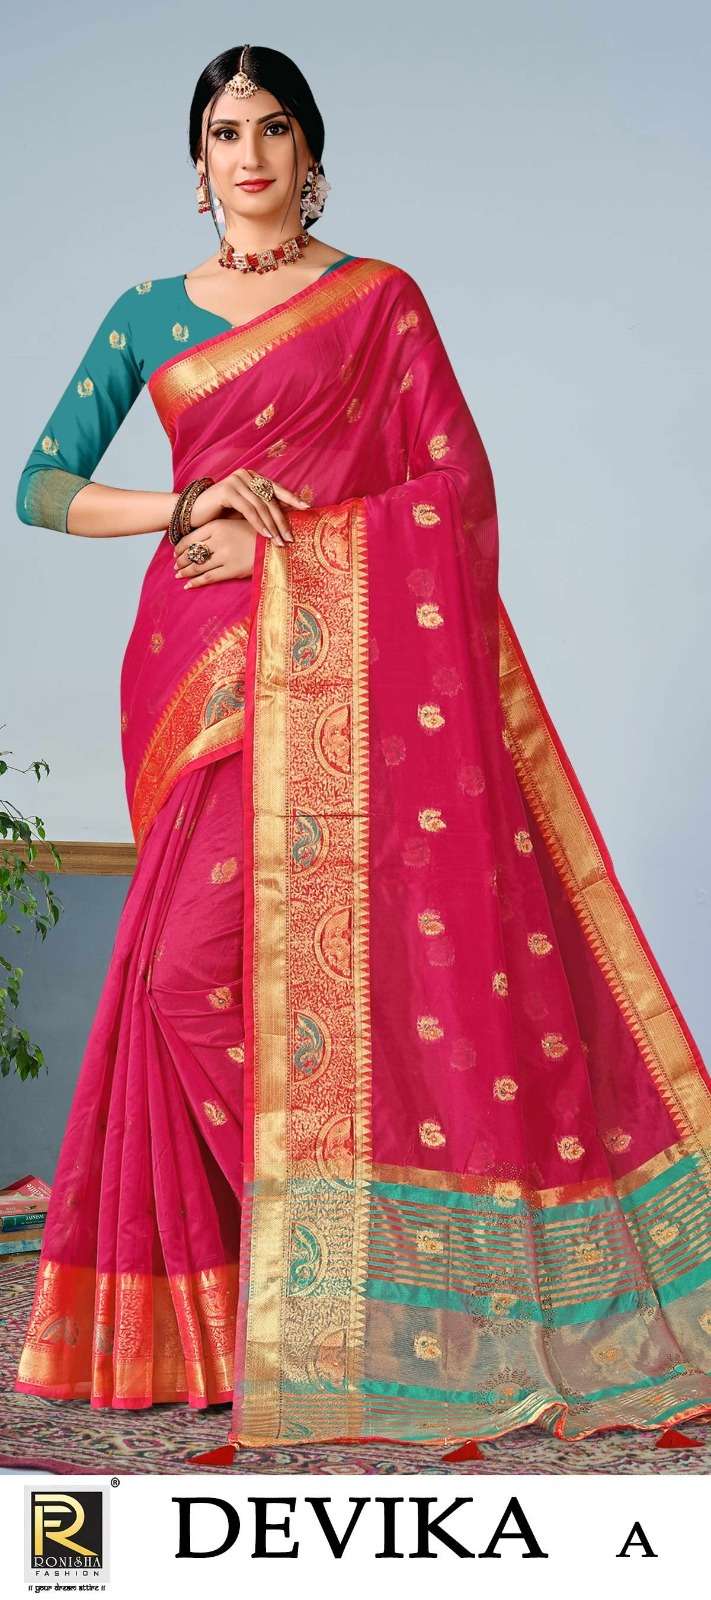 5 Tips For Nailing The South Indian Saree Look For Your Wedding -  Deepamsilksbangalore